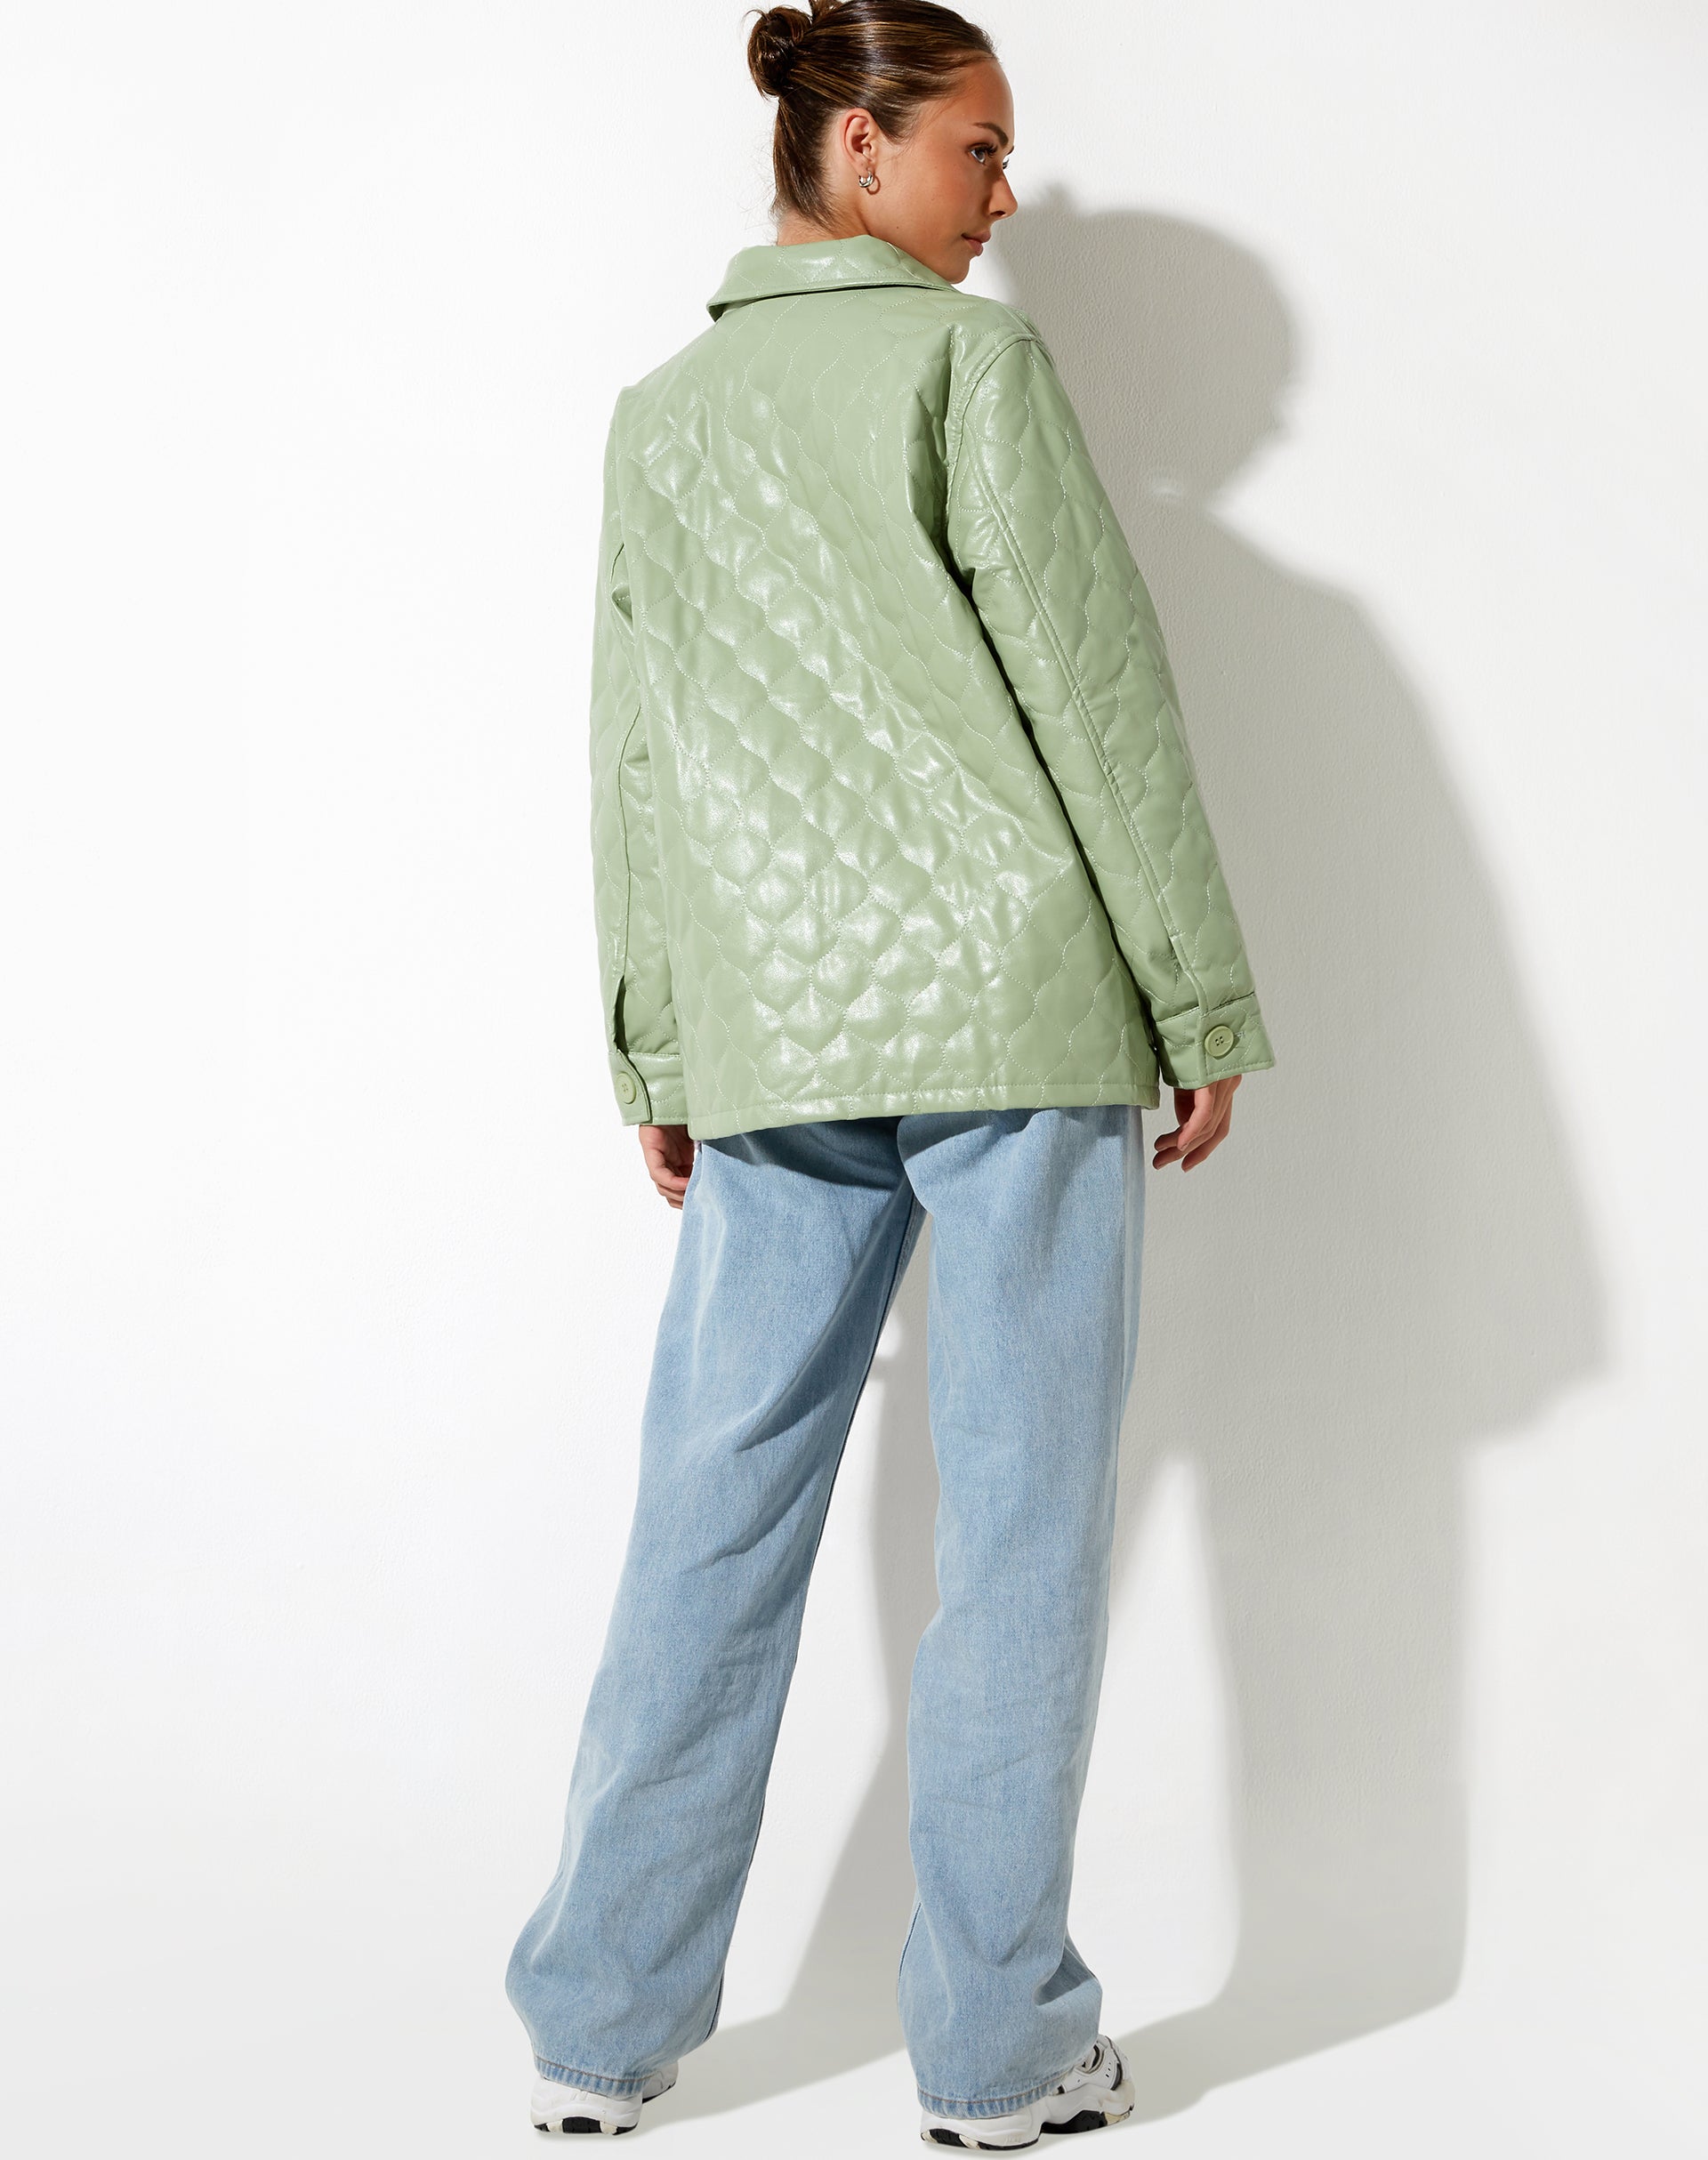 Winka Jacket in Quilted PU Pastel Mint